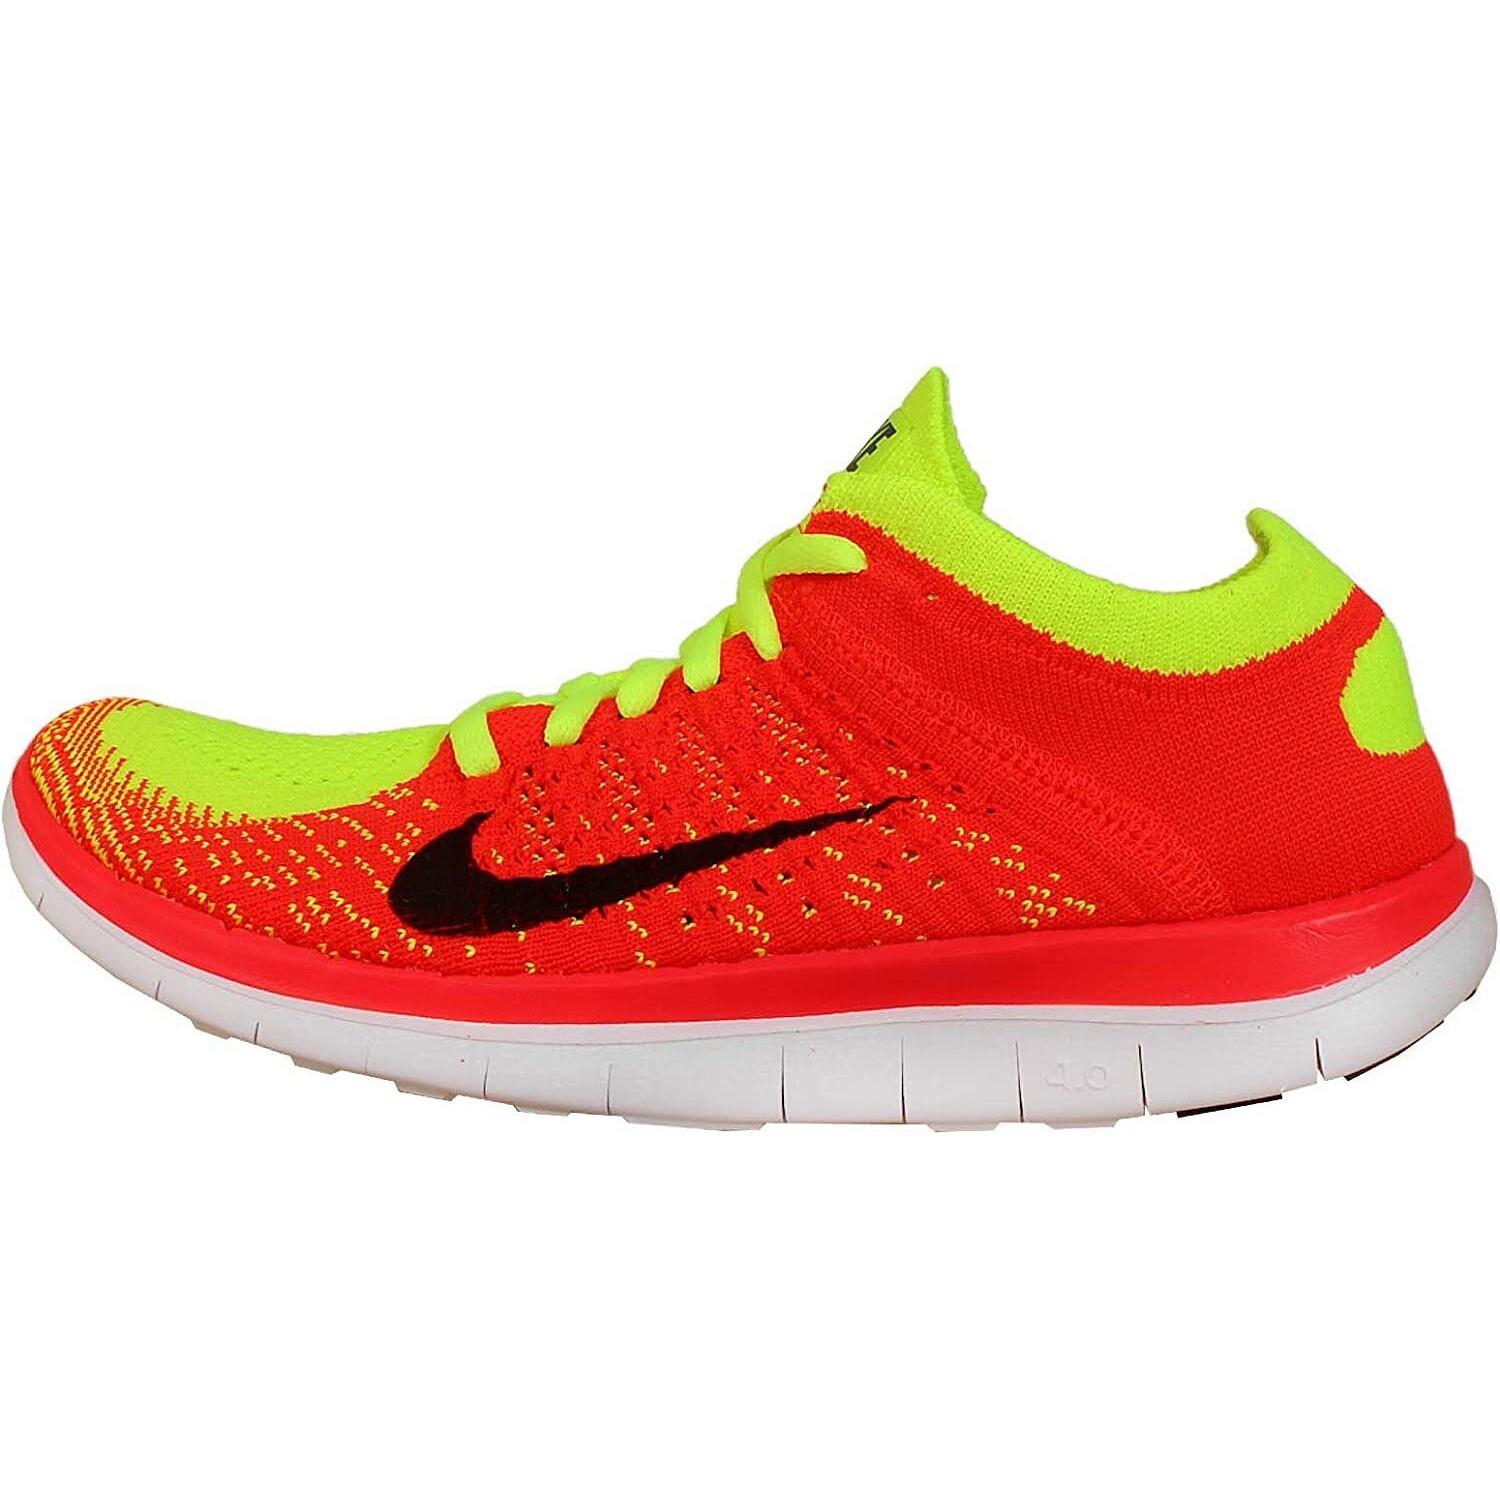 Nike Free 4.0 Flyknit Green/red/white Running Shoes 631050 700 Women Size 6 - Green , Red , White